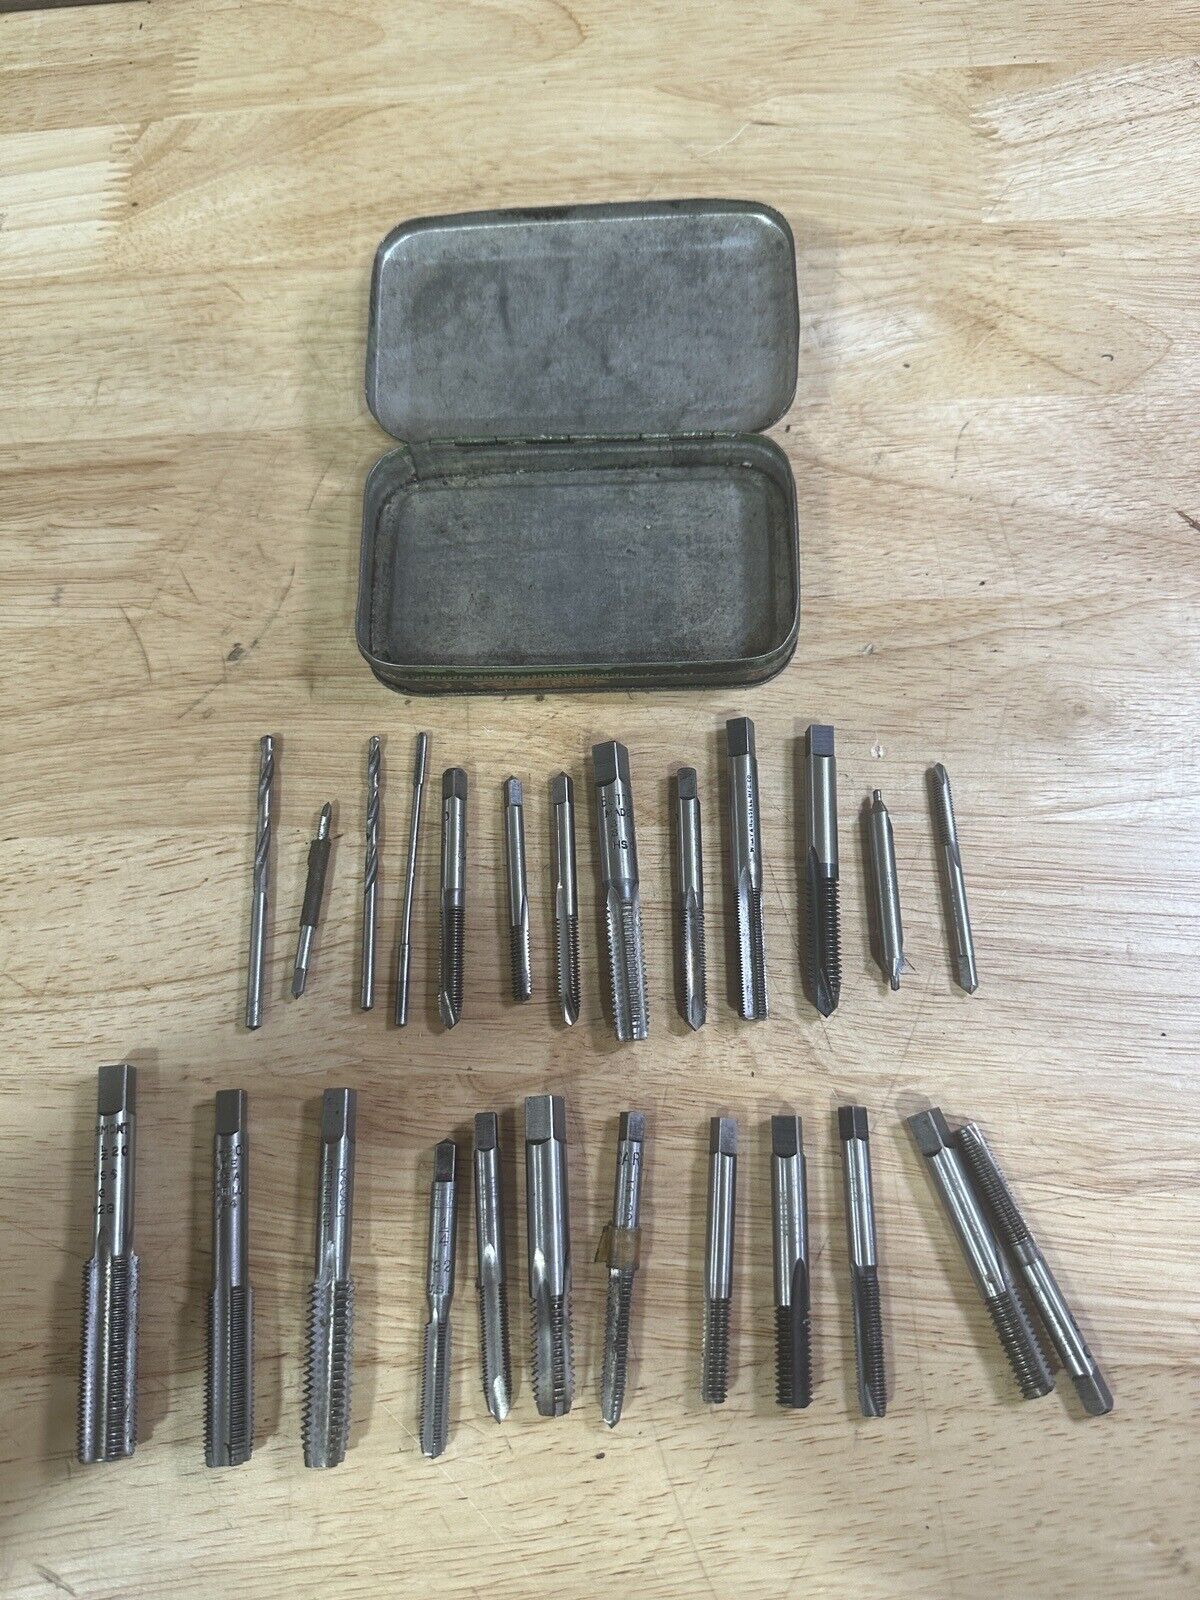 Vintage Lot Of 25 Precision Machining Bottom/Threading Taps And Drill Bits